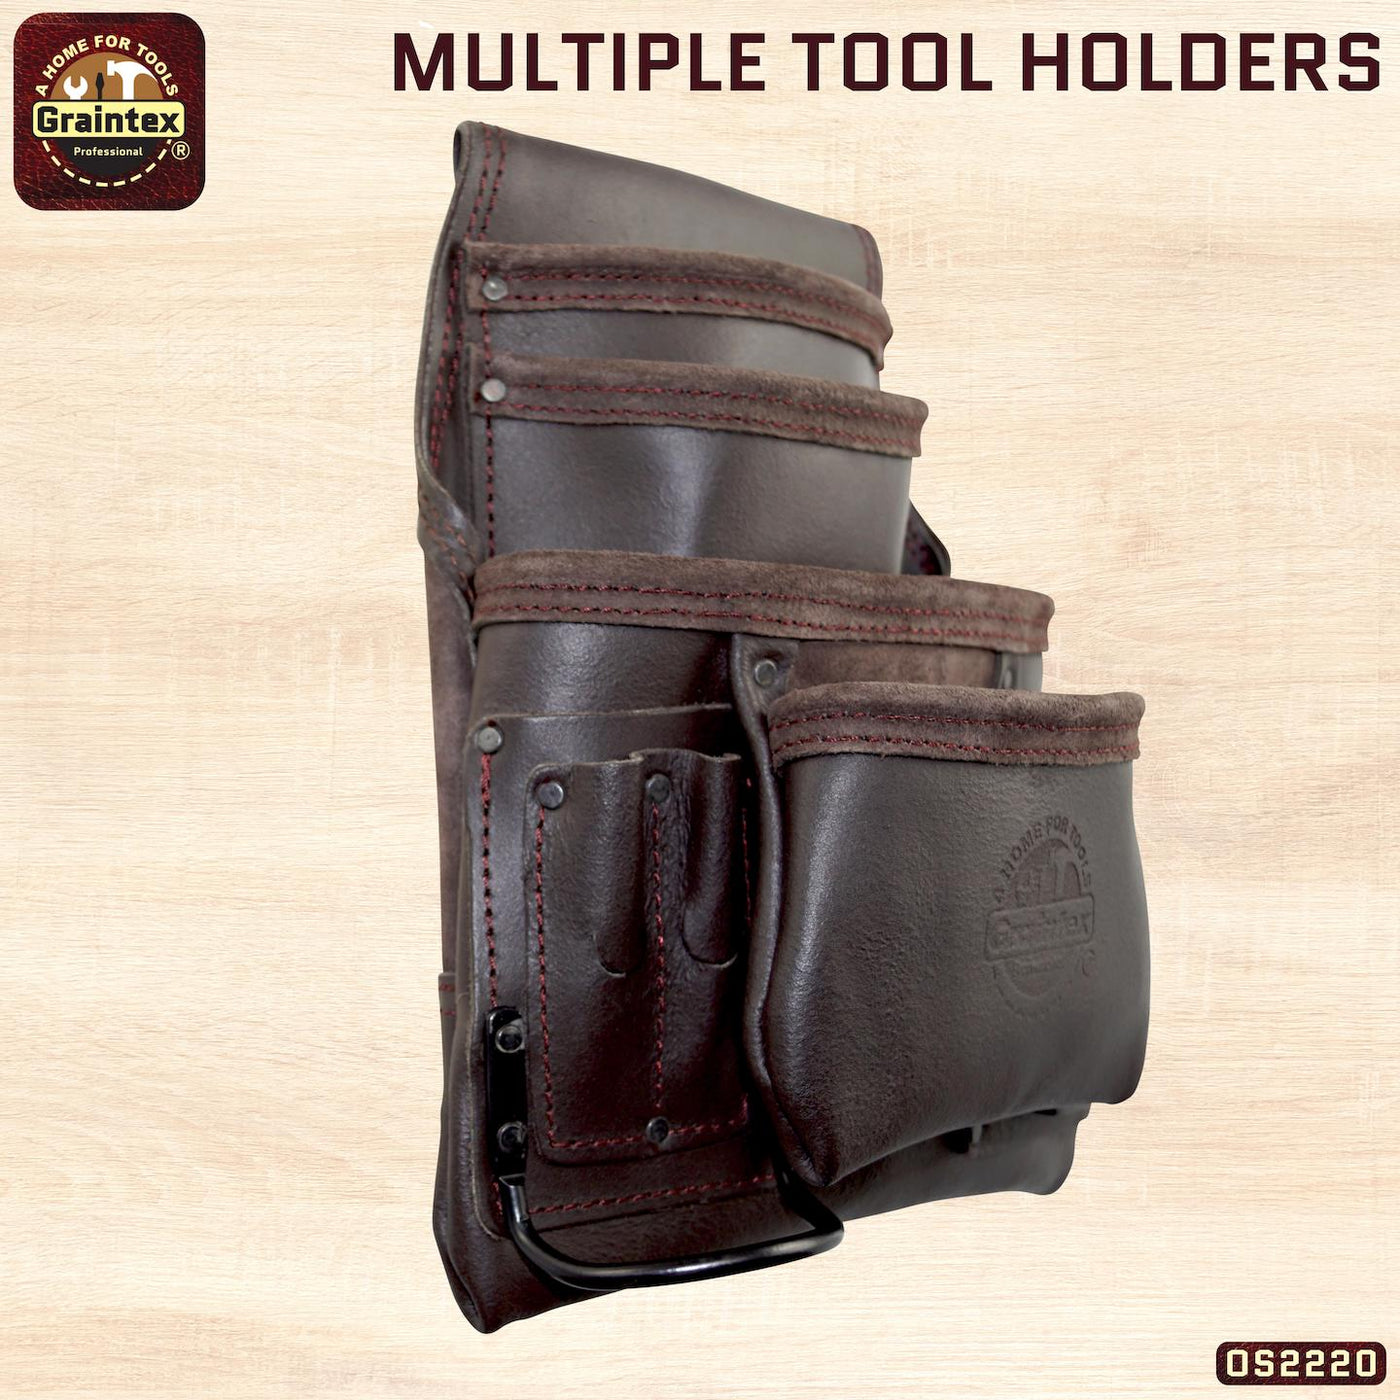 OS2220 :: 10 Pocket Nail & Tool Pouch Oil Tanned Leather